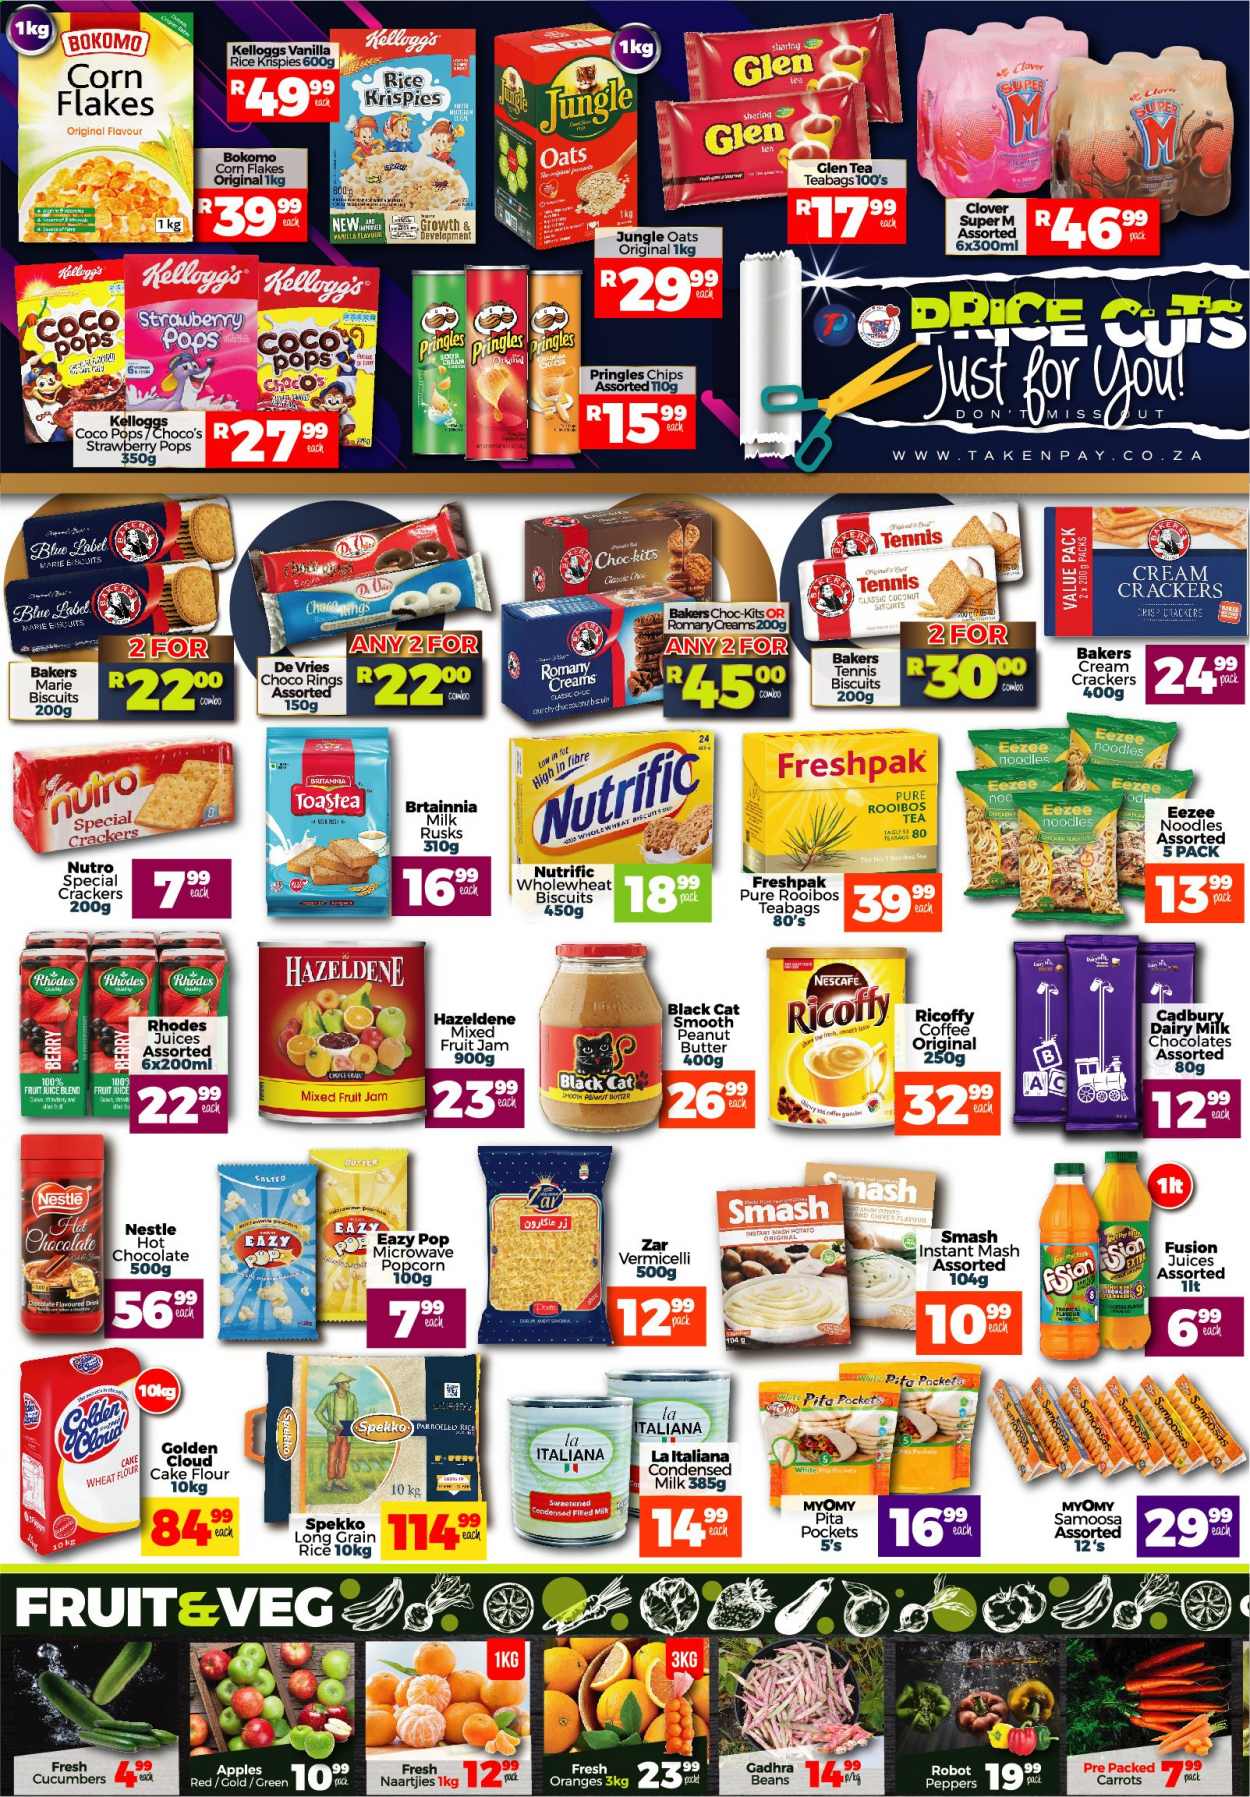 Take n Pay specials - 04.20.2021 - 04.25.2021. 